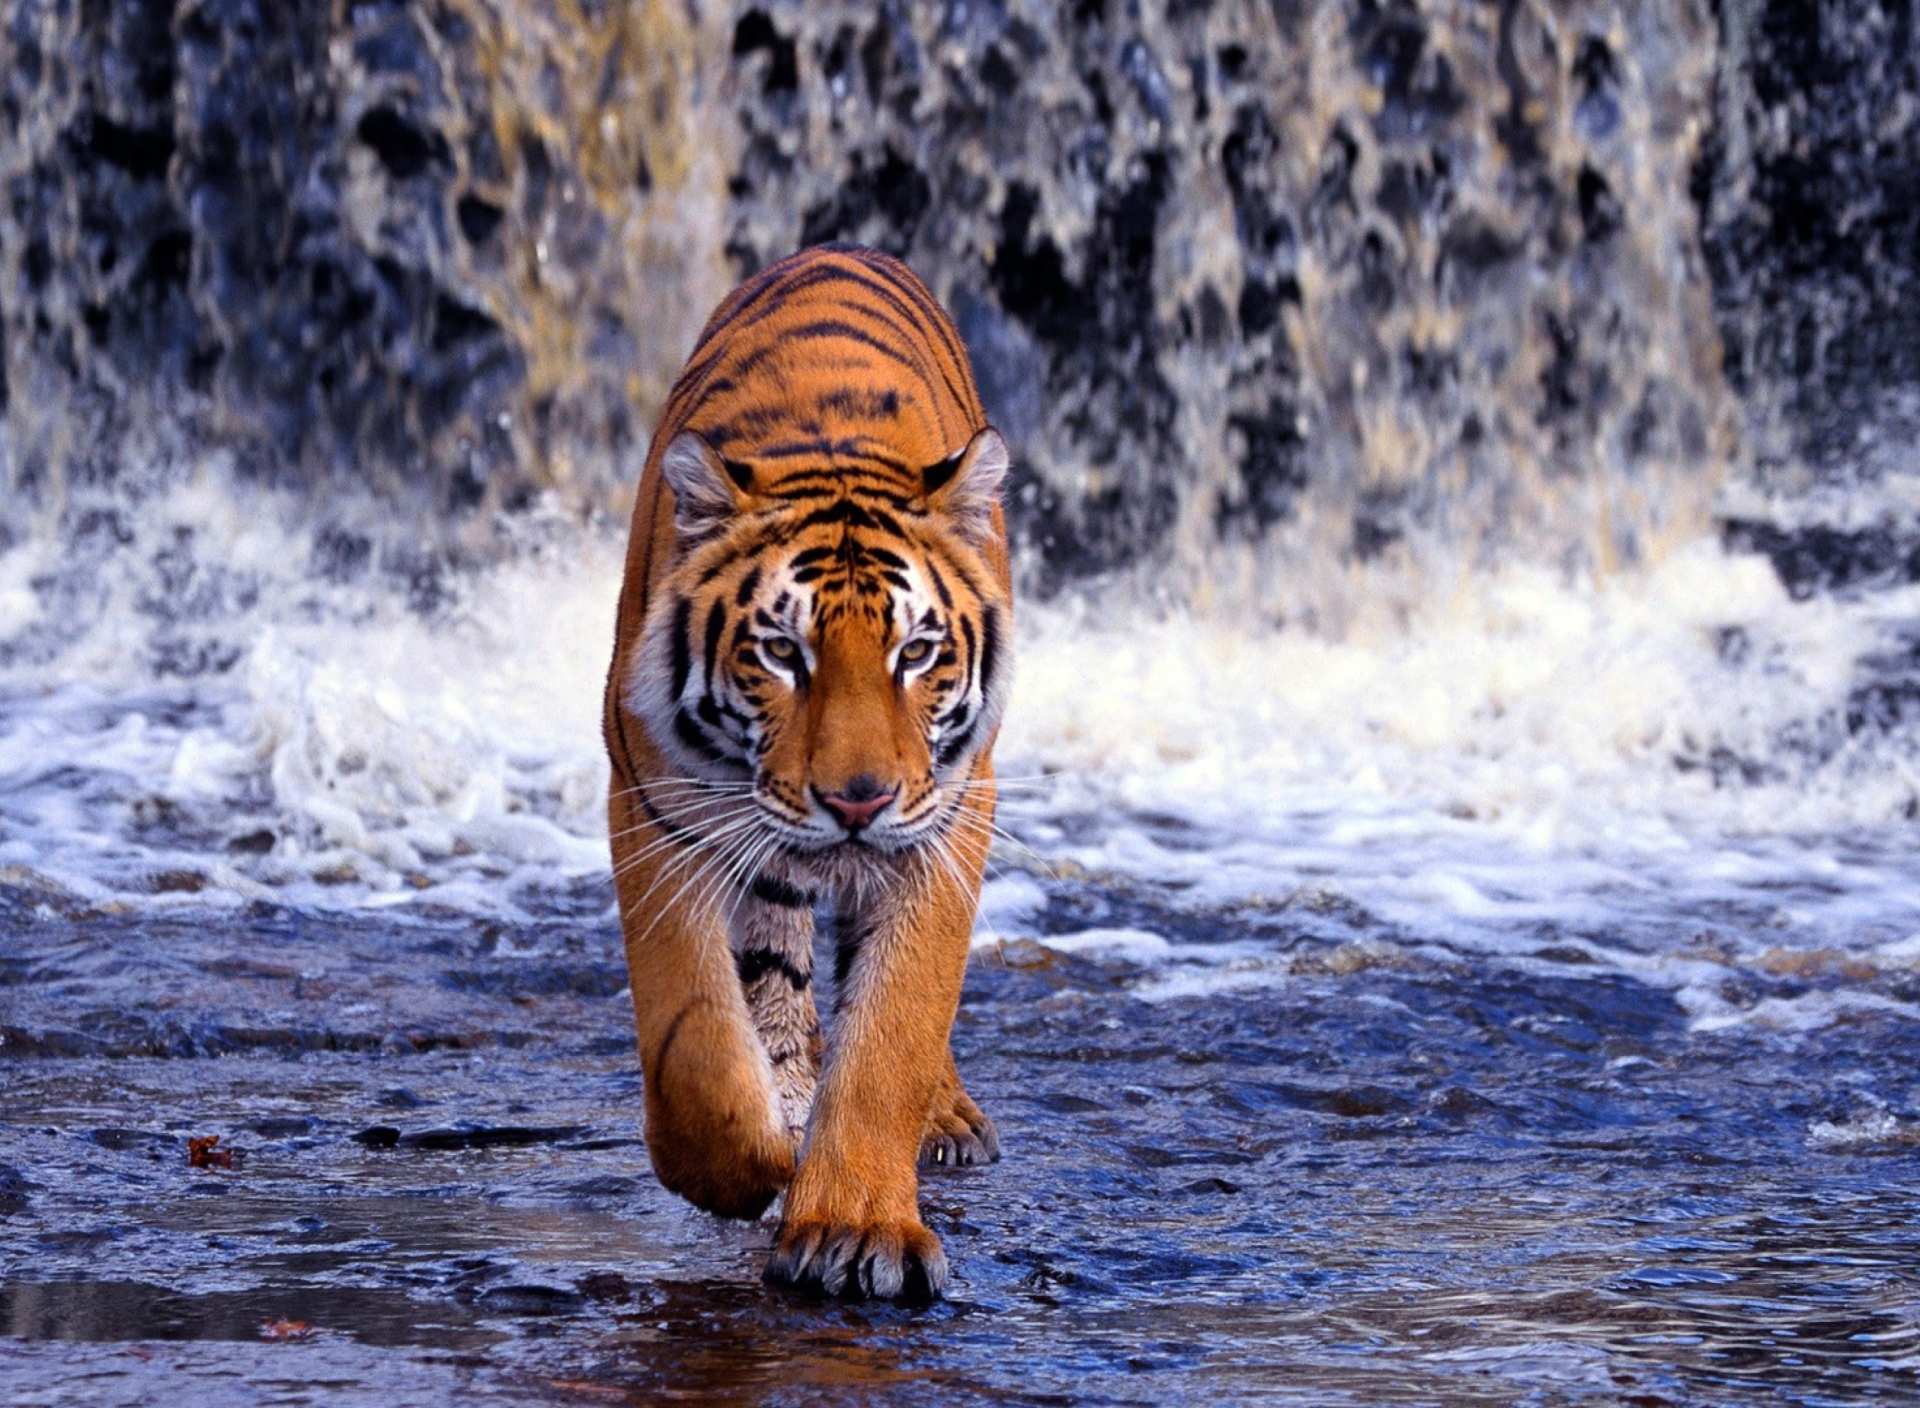 Tiger And Waterfall wallpaper 1920x1408